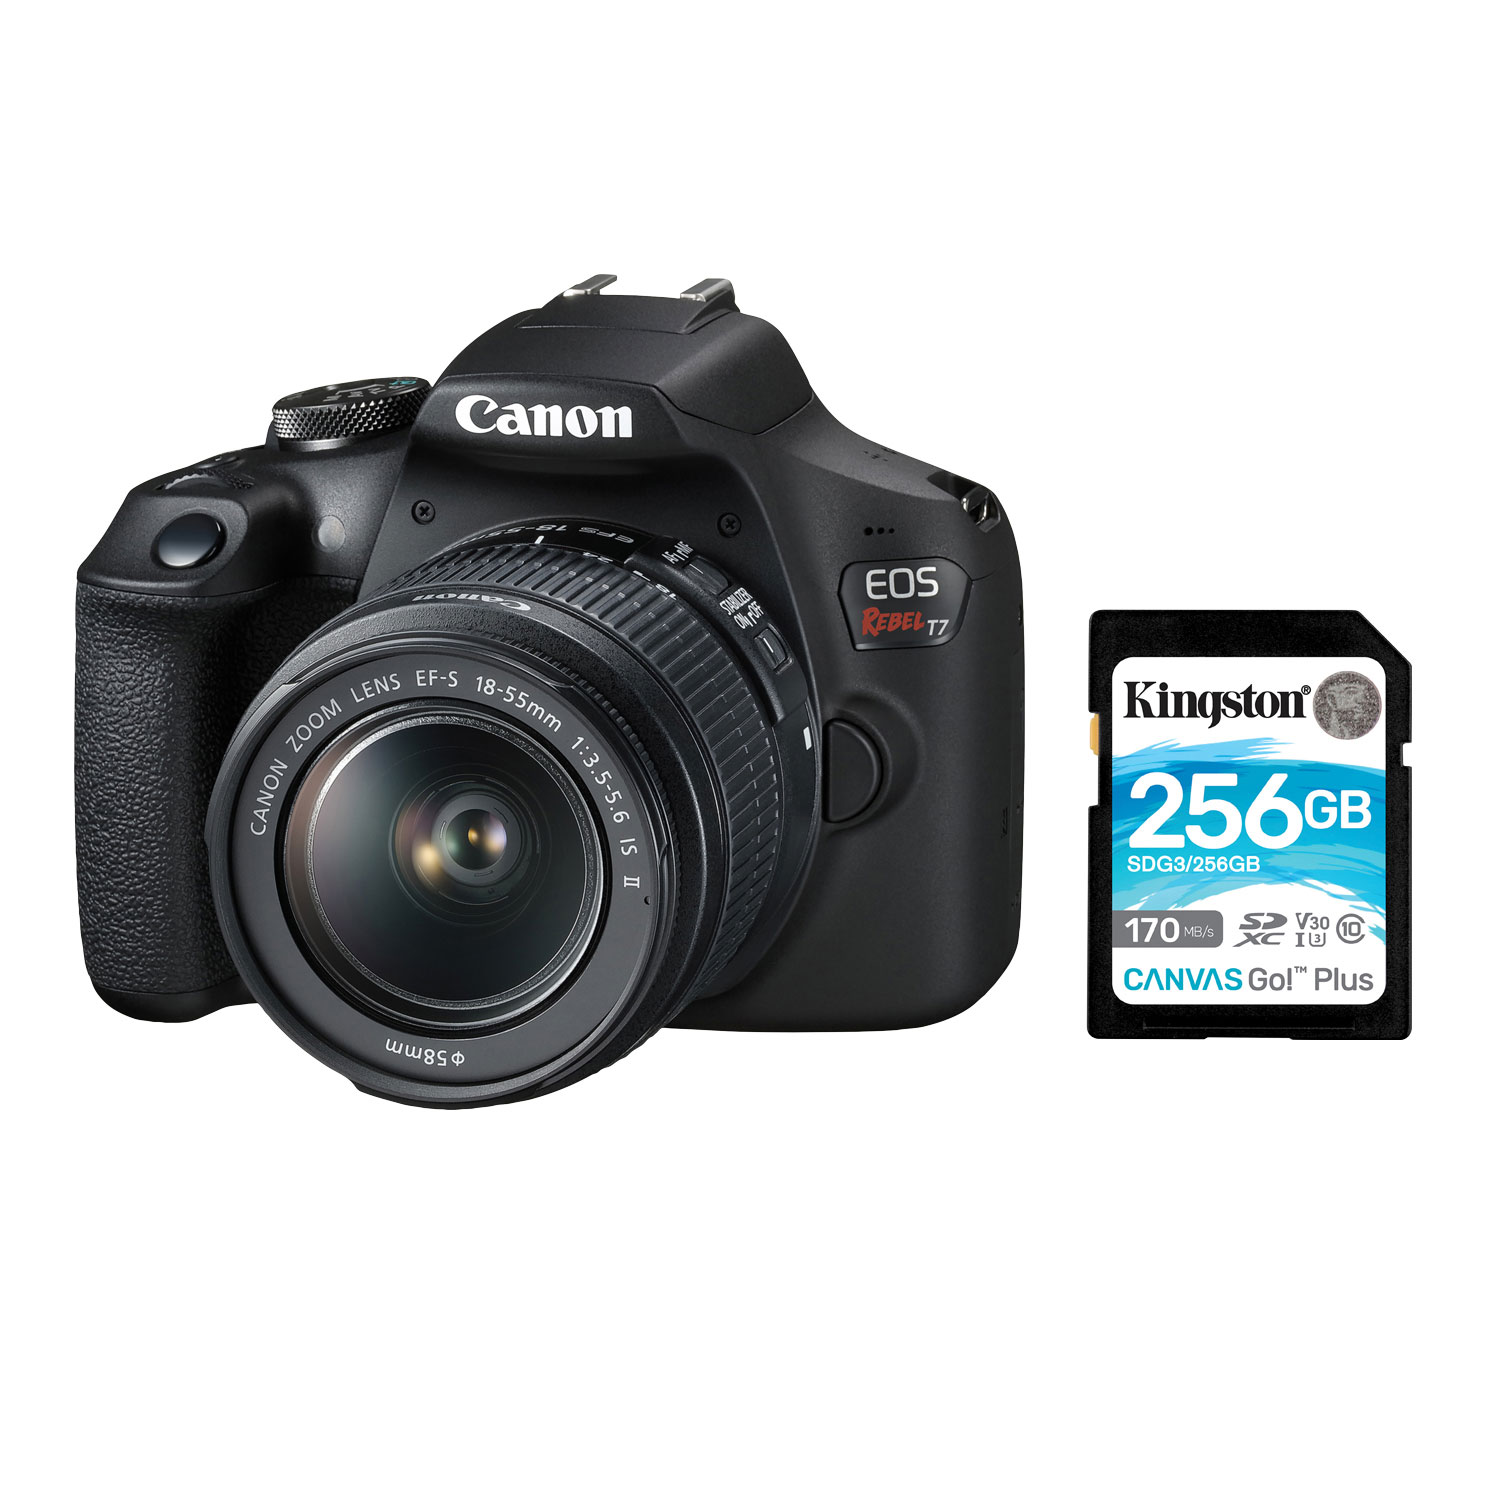 Canon EOS Rebel T7 DSLR Camera w/ 18-55mm IS Lens Kit & 256GB 170MB/s SDXC Memory Card